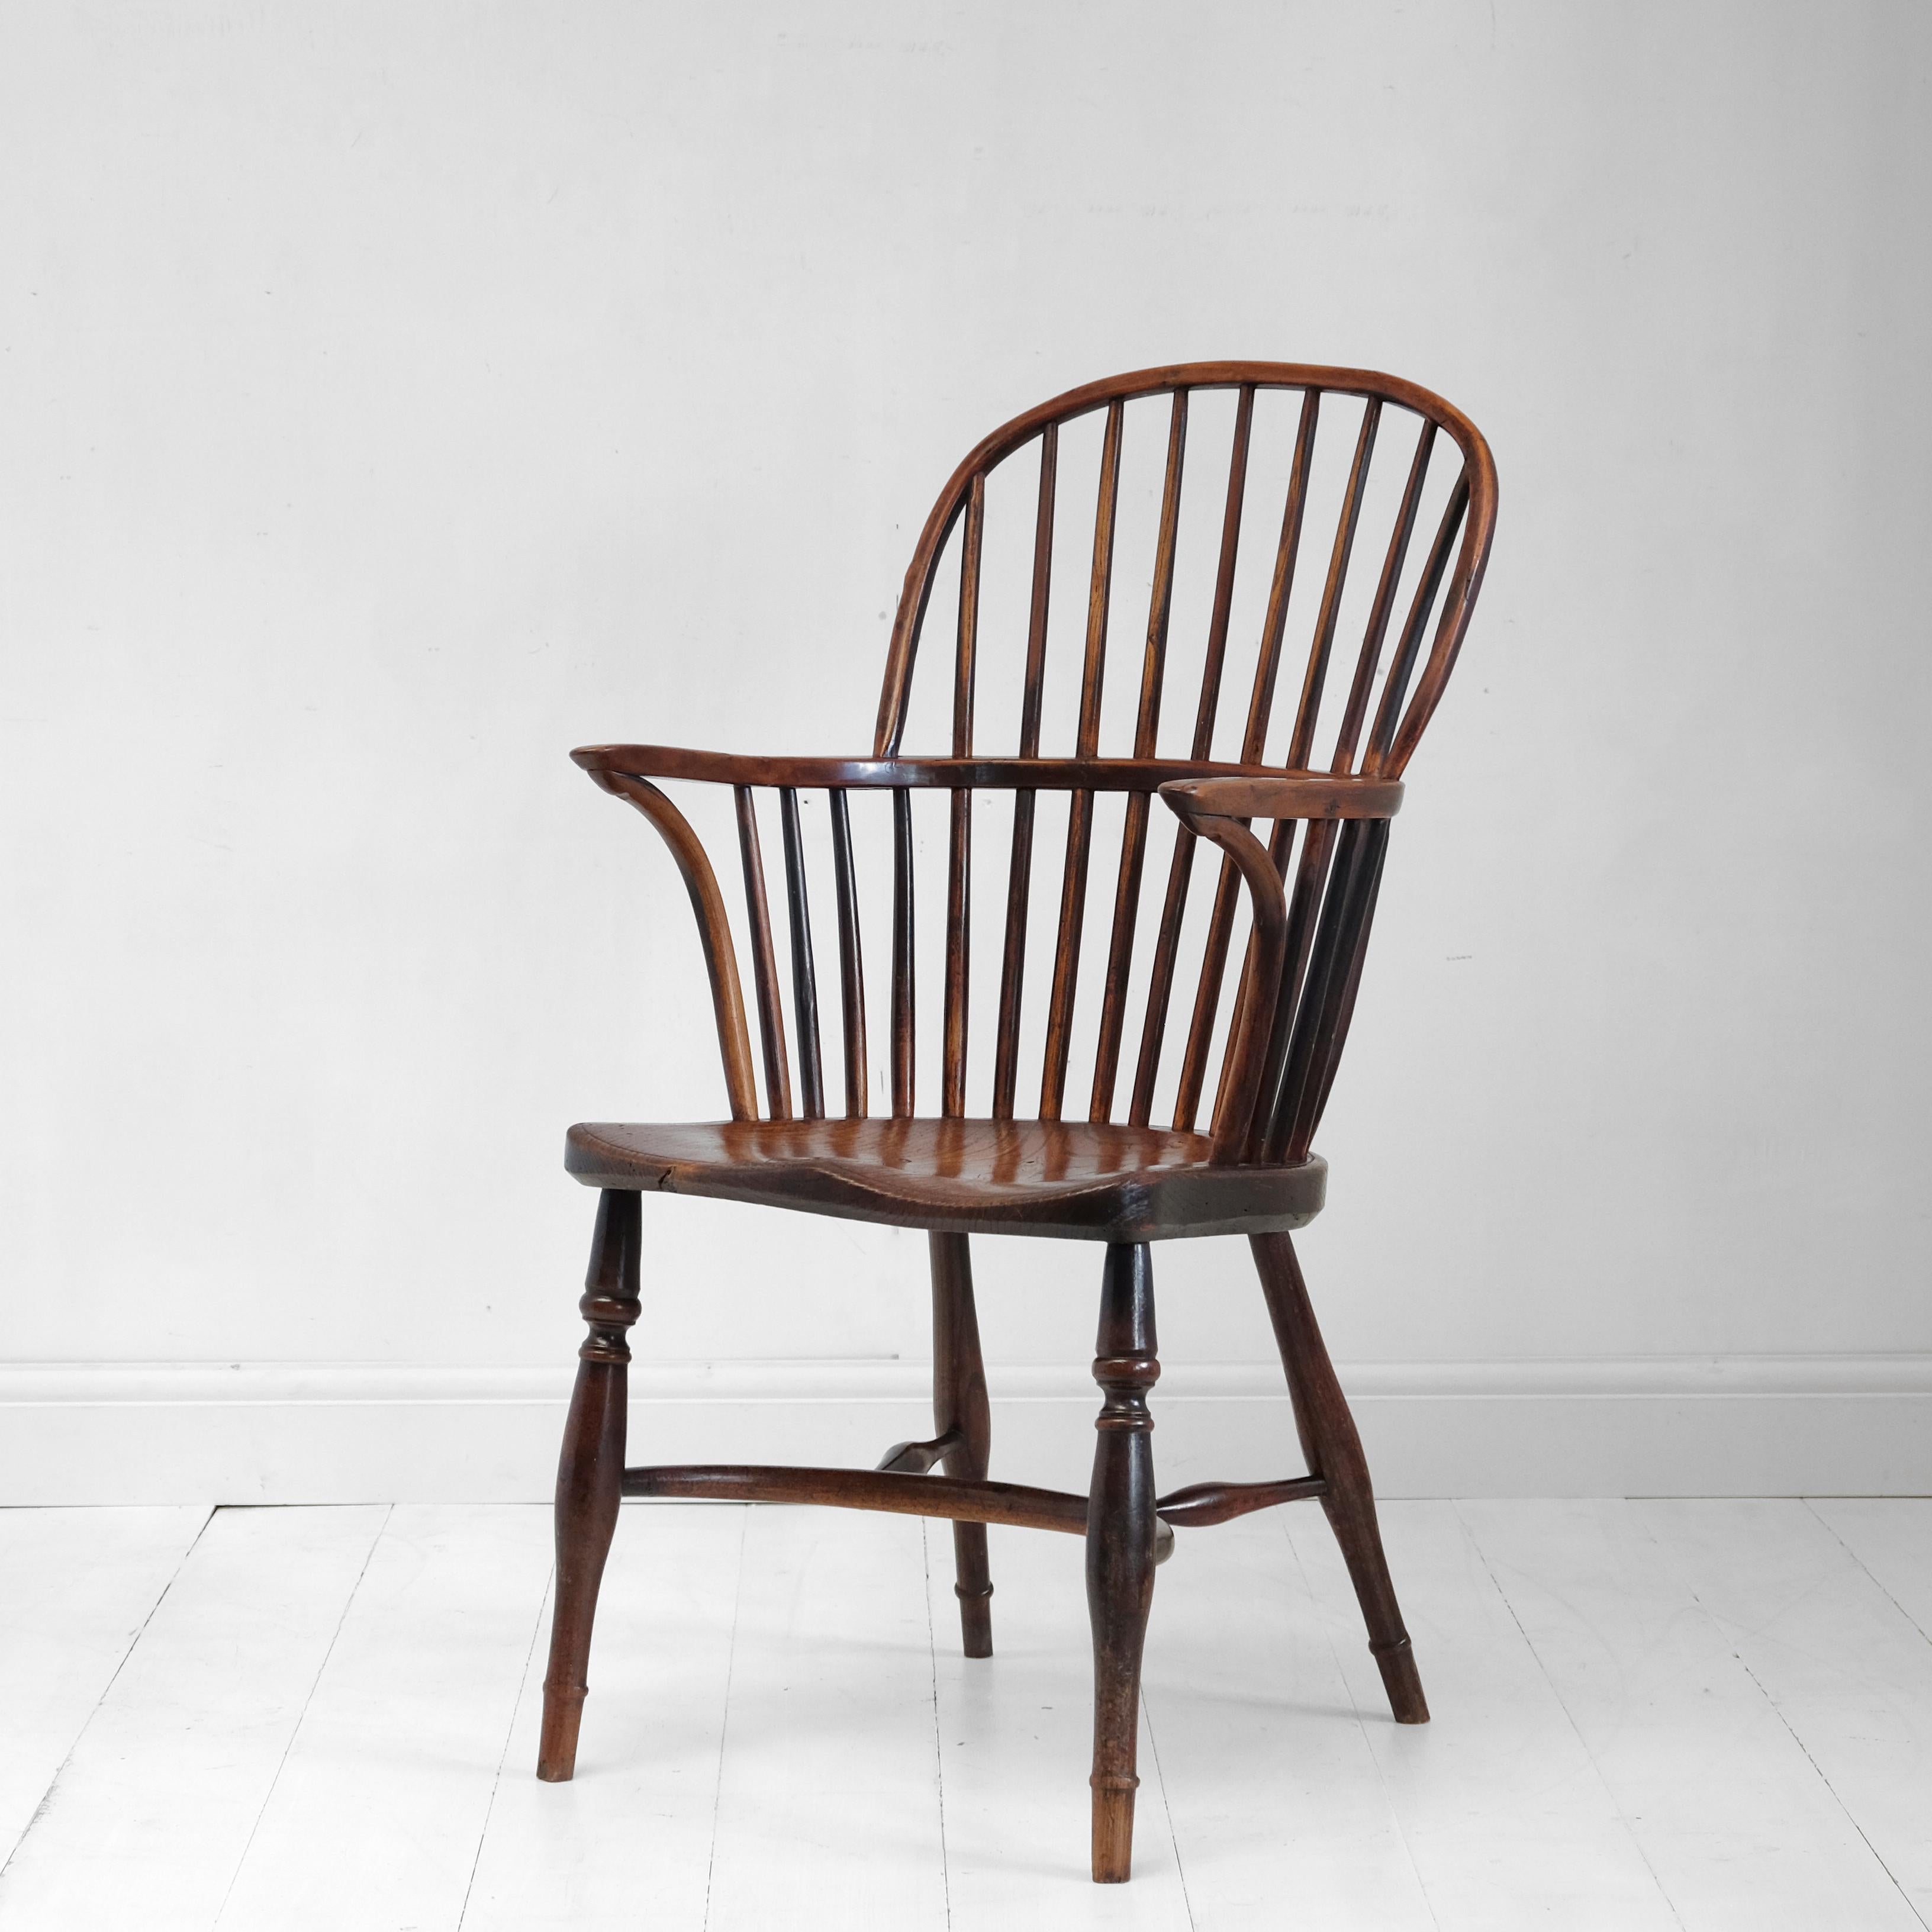 A good antique English Windsor chair in yew and ash with elm seat. Turned legs with crinoline stretcher, saddle-shaped seat with attractive grain pattern, yew arm and back hoop with simple stick back. The whole with a rich, warm color. Good solid